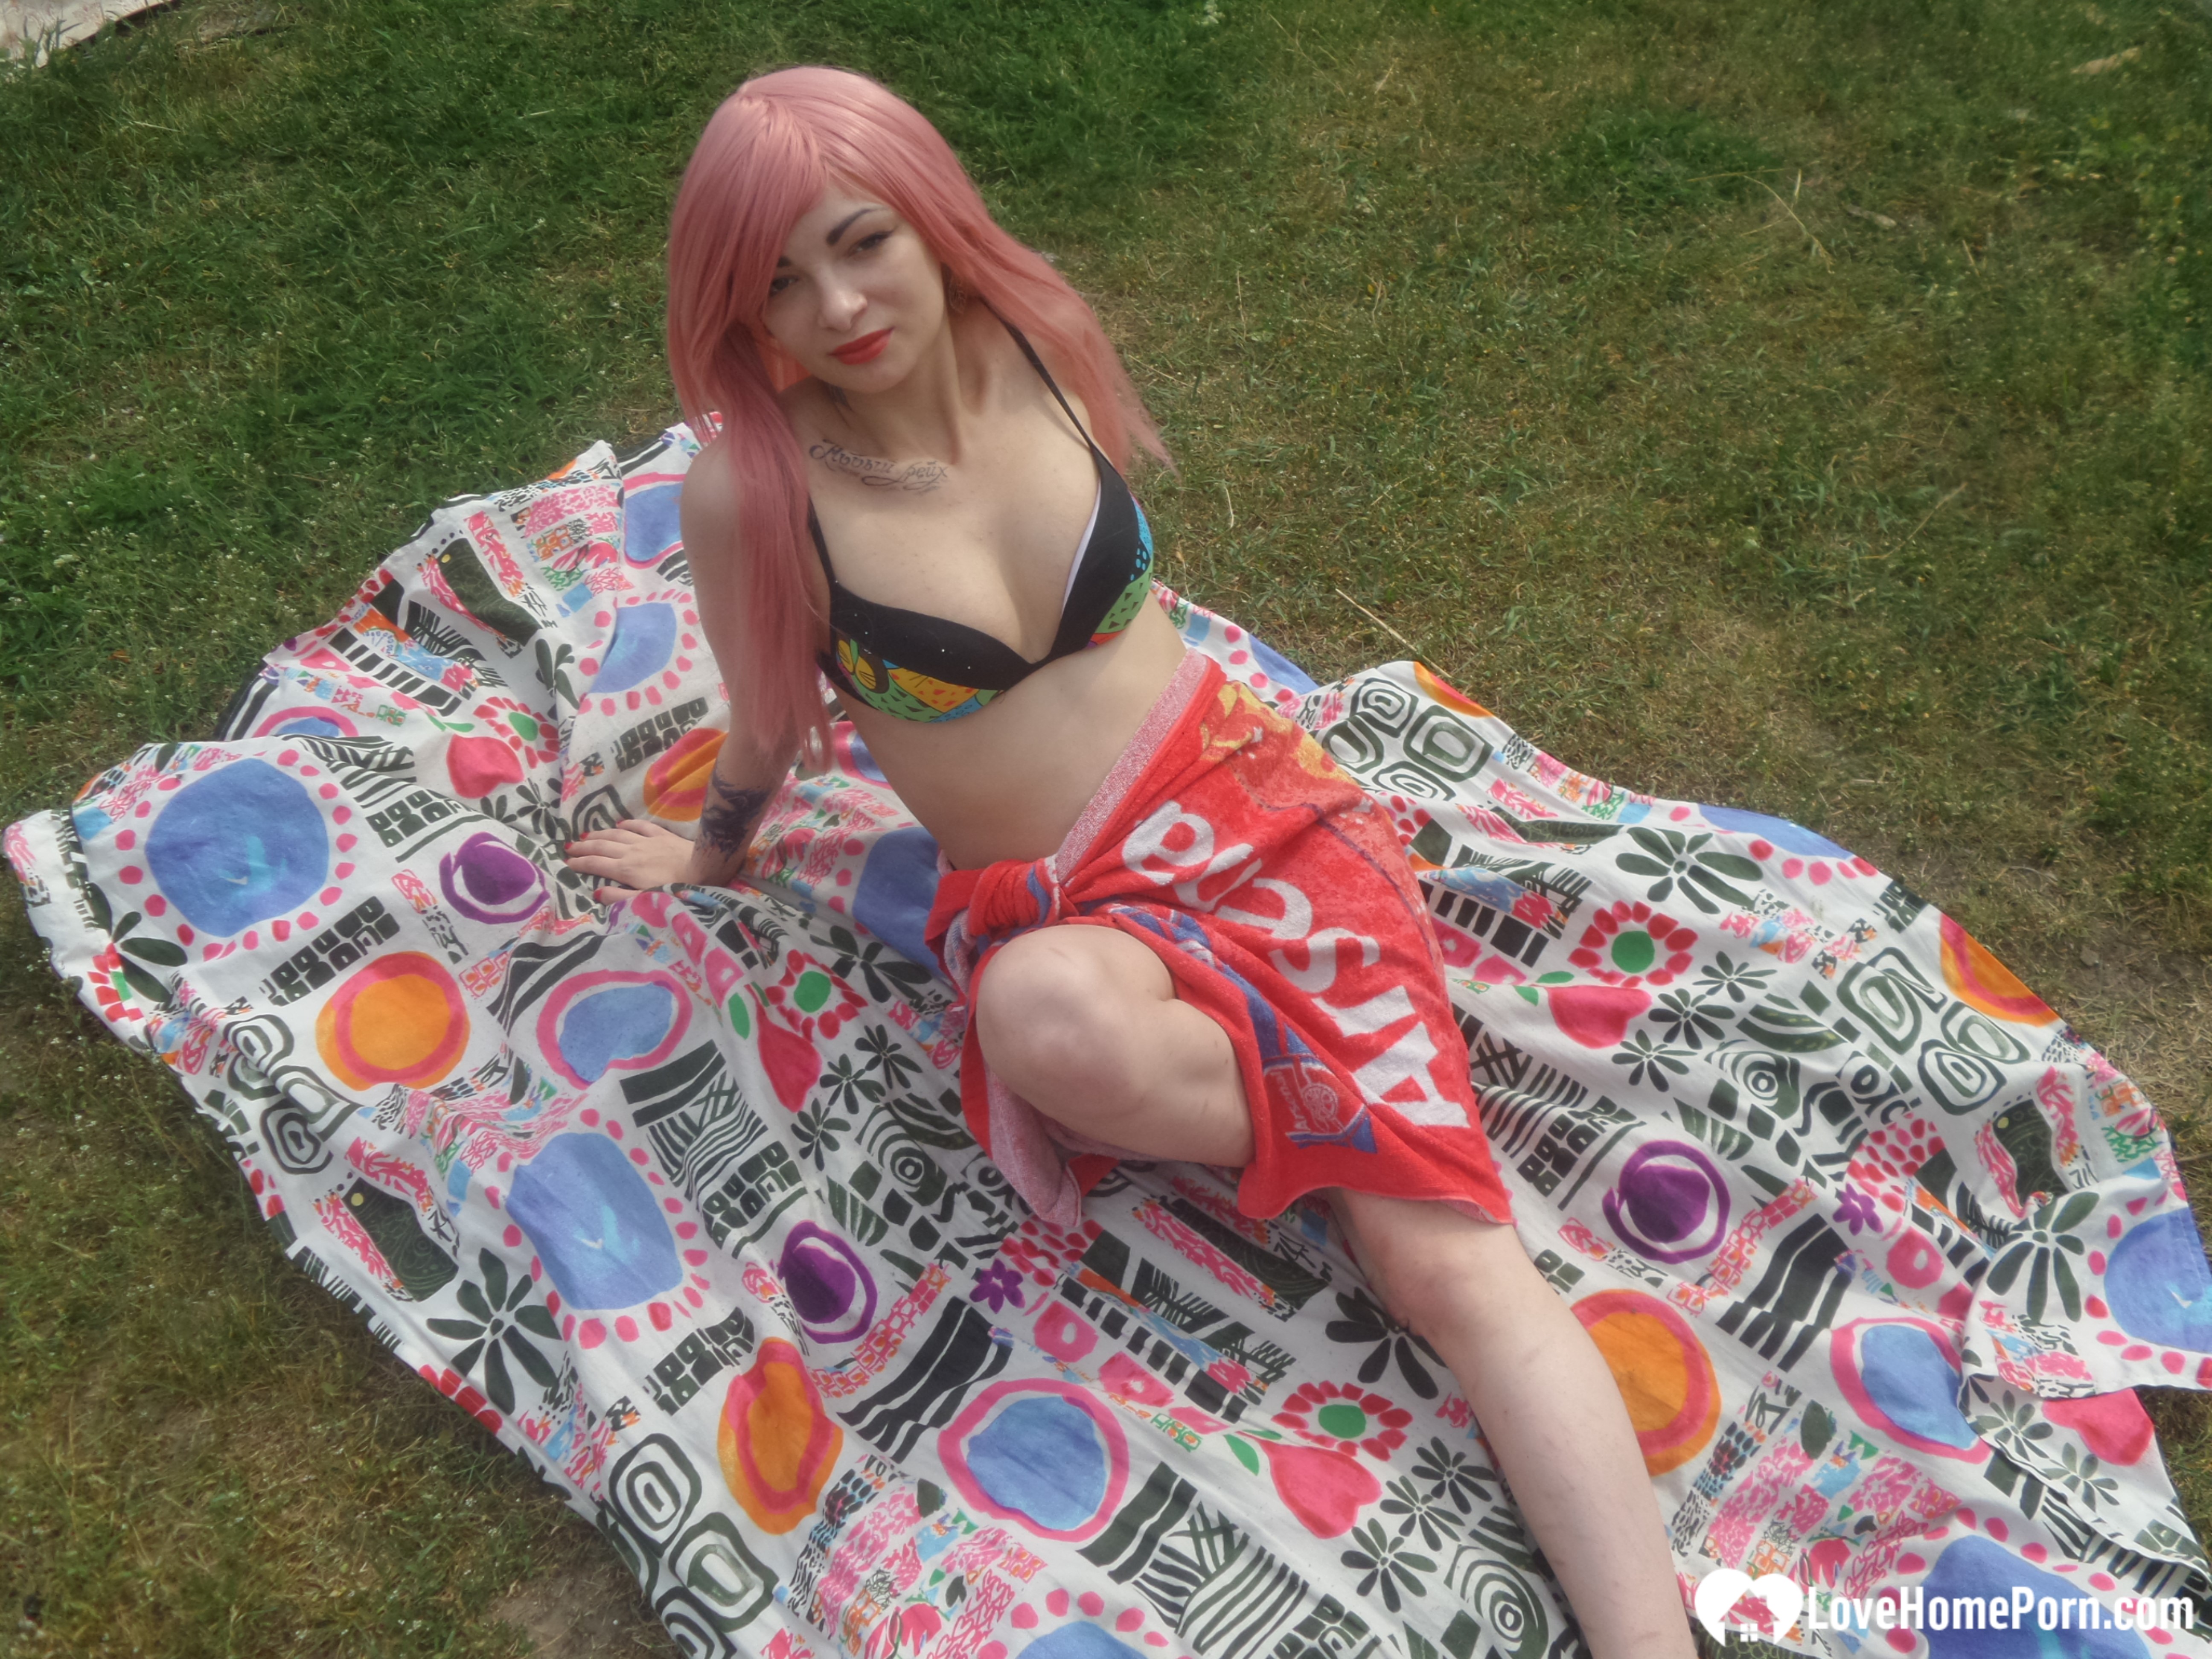 Pink-haired beauty plays with her love tunnel